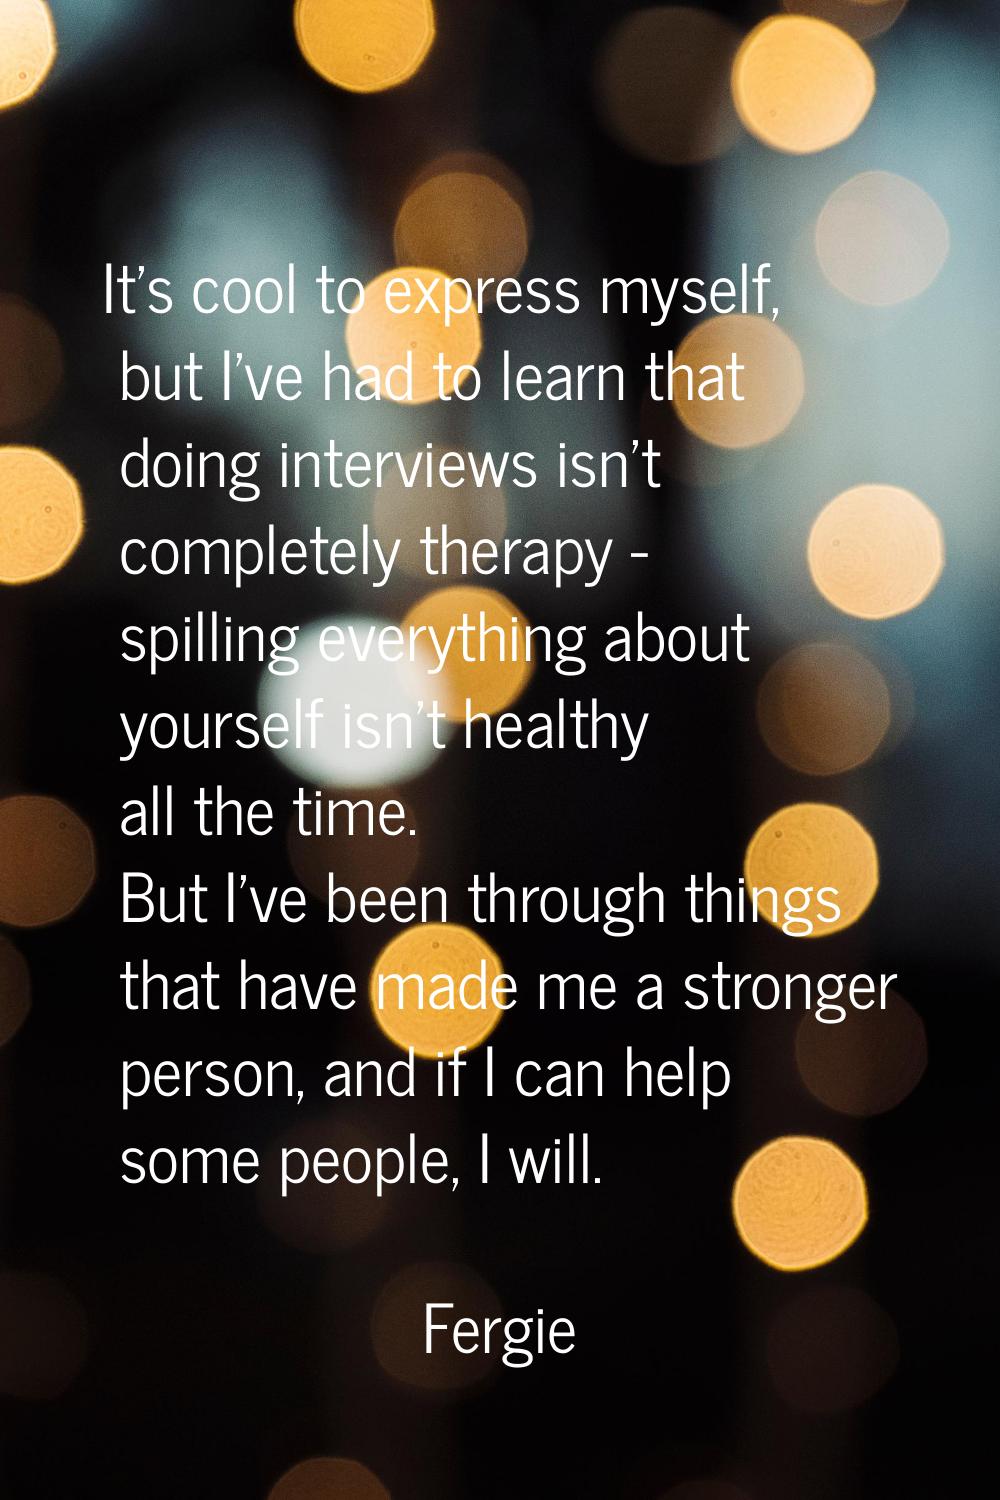 It's cool to express myself, but I've had to learn that doing interviews isn't completely therapy -